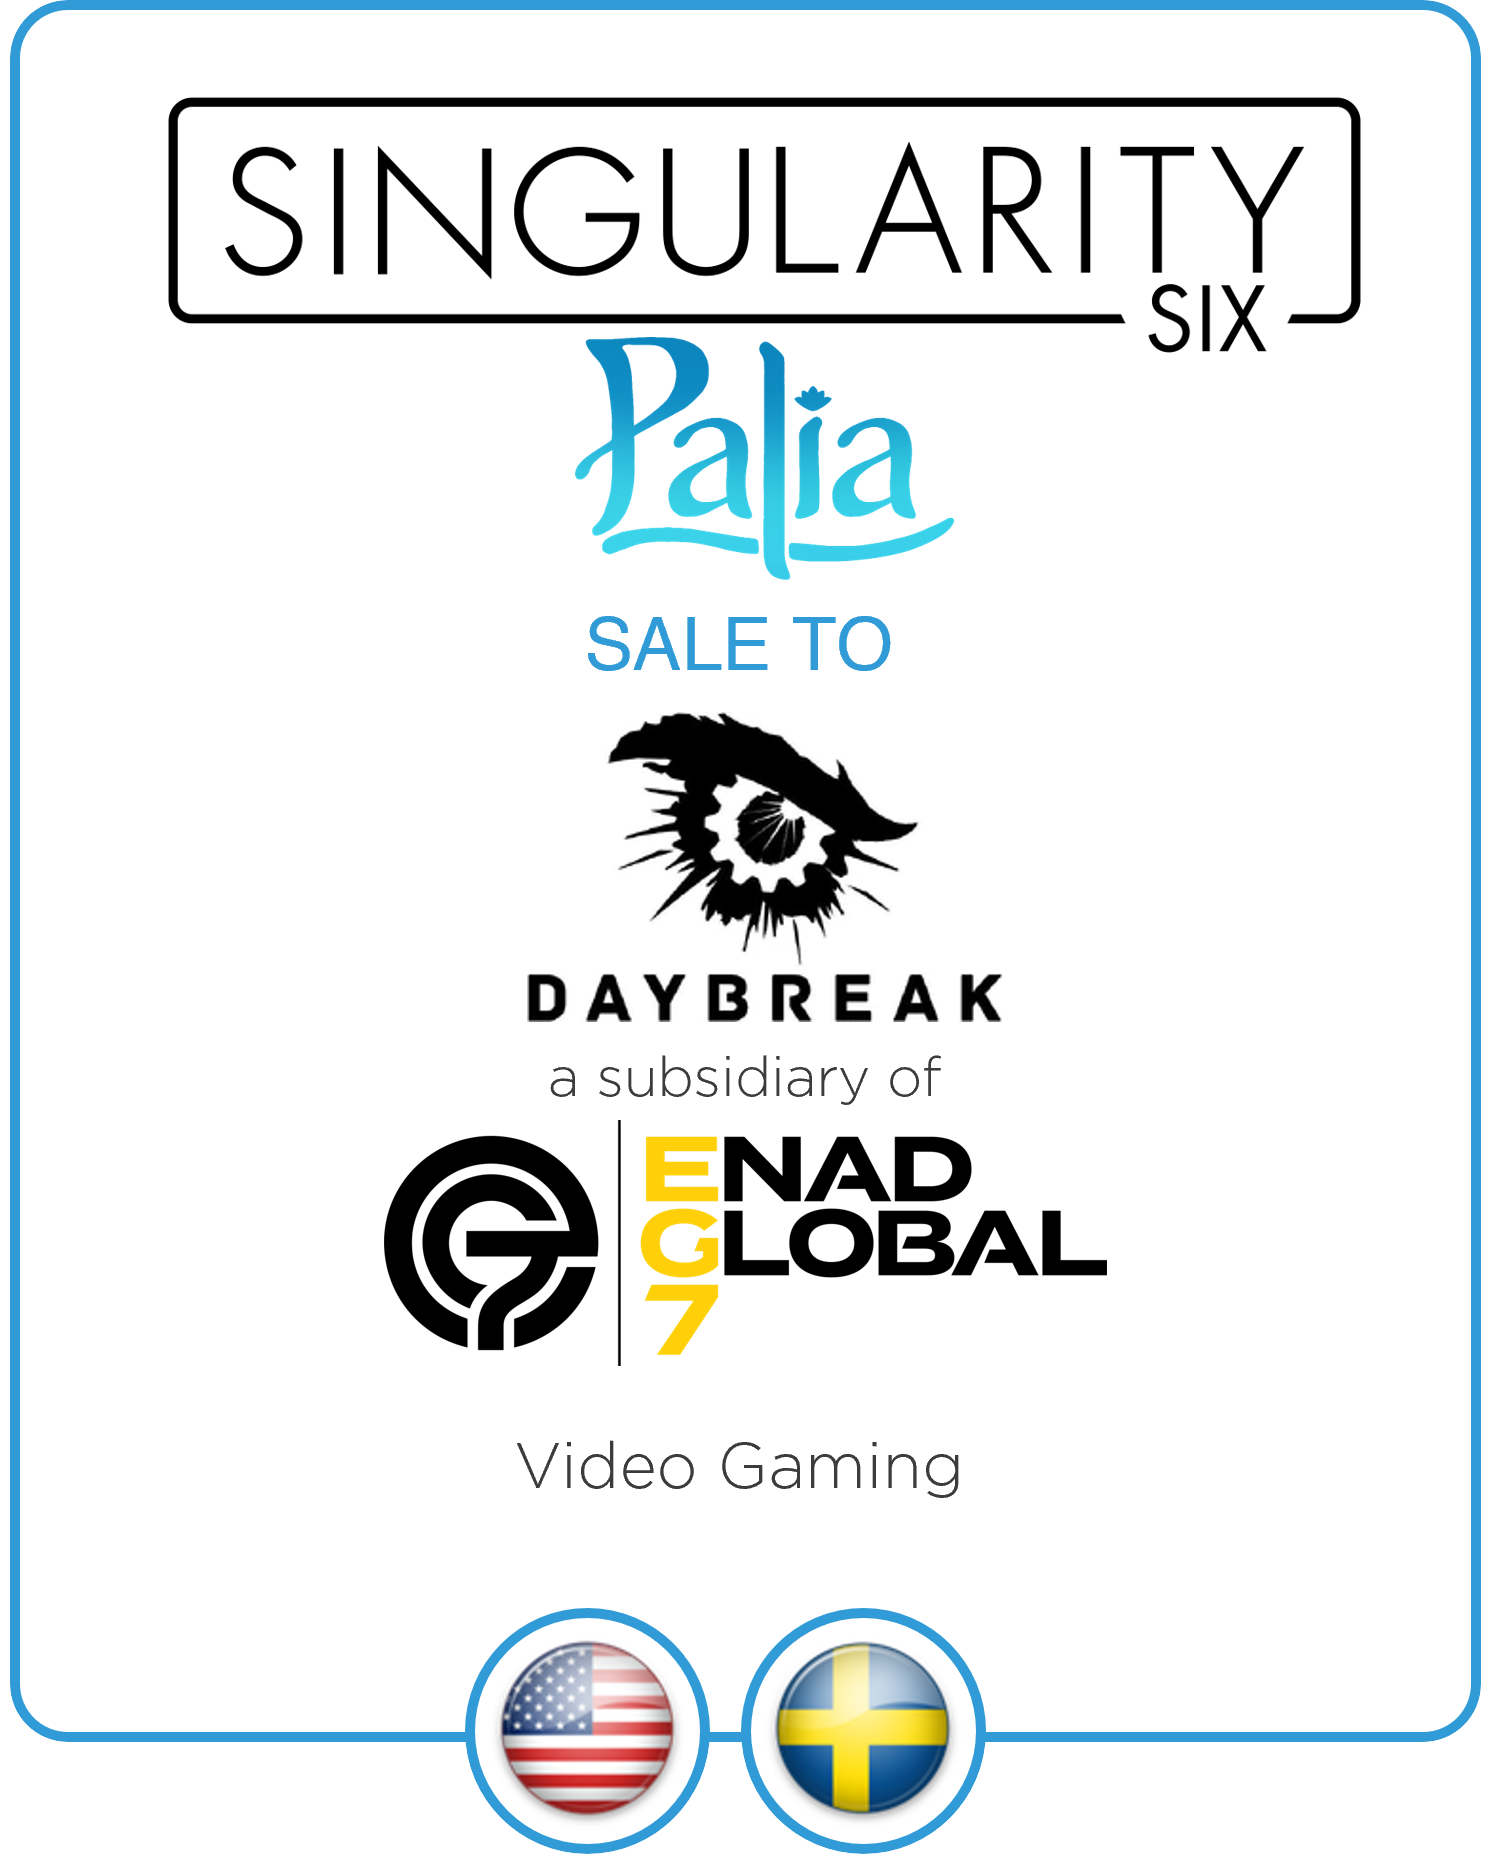 Drake Star Acts as Exclusive Financial Advisor to Singularity 6 on its Sale to Daybreak Games, a subsidiary of Enad Global 7 AB (STO: EG7)